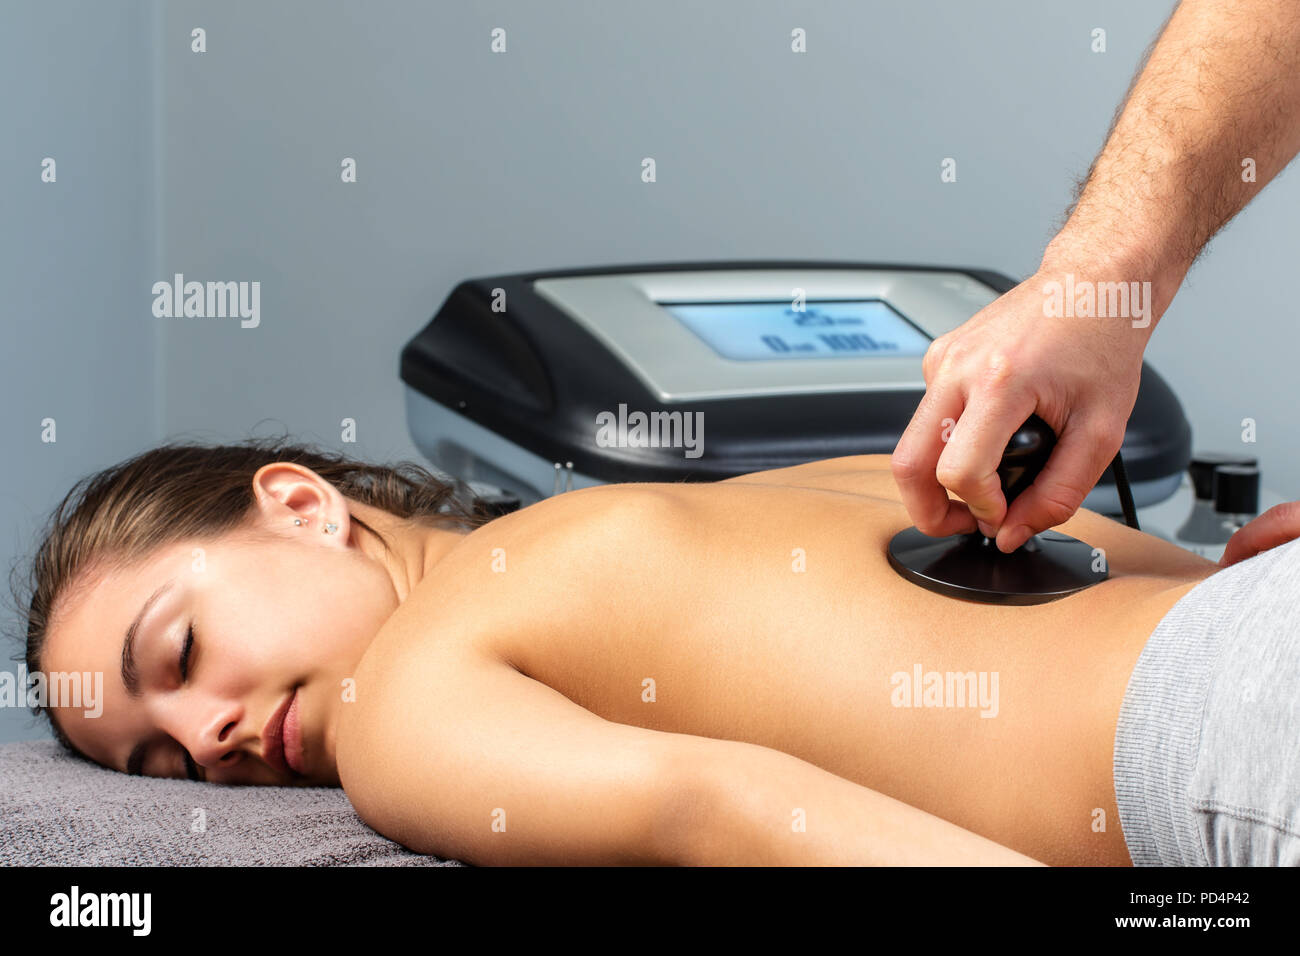 Close up of young woman having electrotherapy session.Therapist stimulating nerves and muscles on female spine. Stock Photo